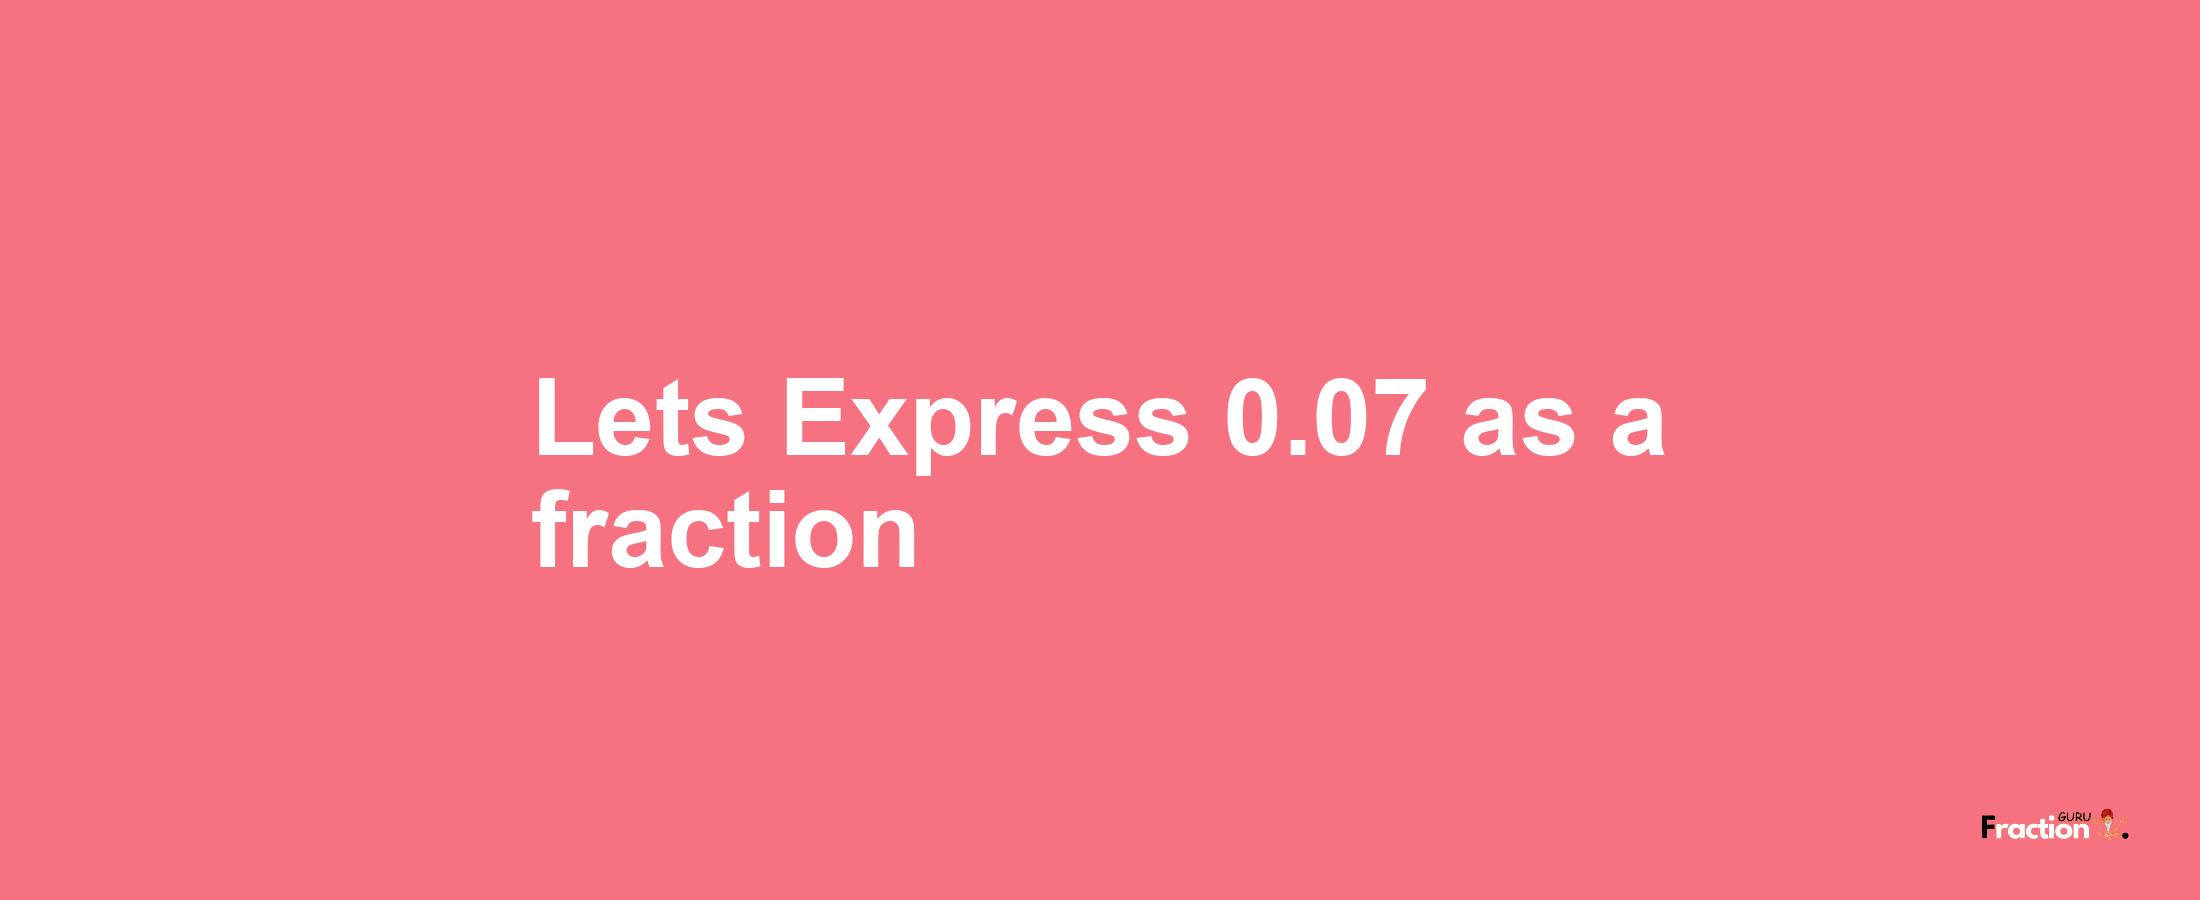 Lets Express 0.07 as afraction